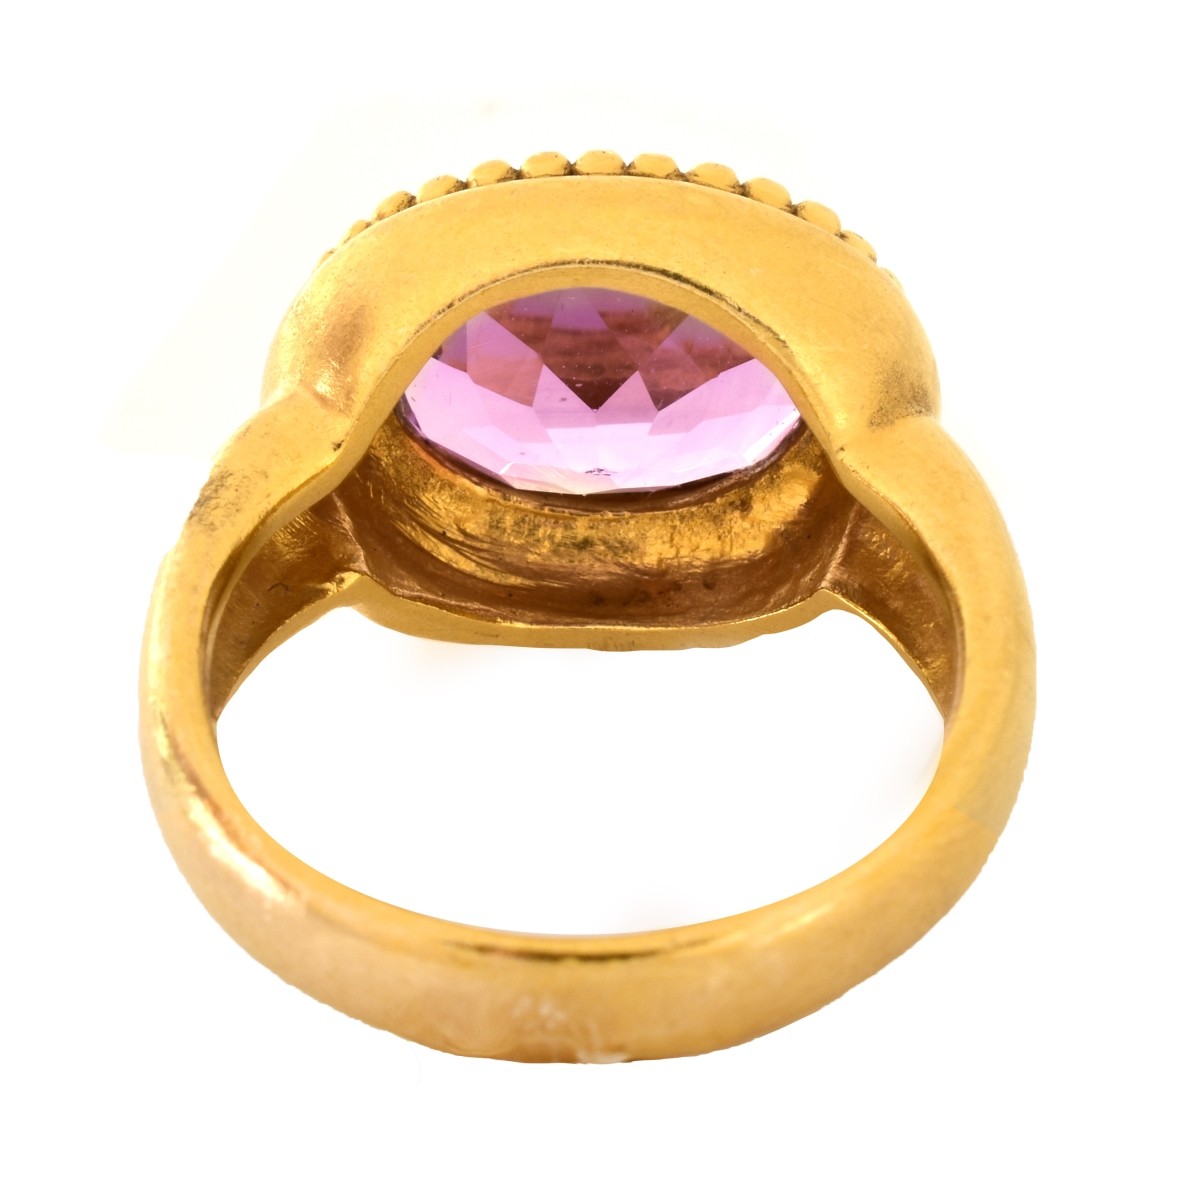 Amethyst and 14K Gold Ring - Image 4 of 7